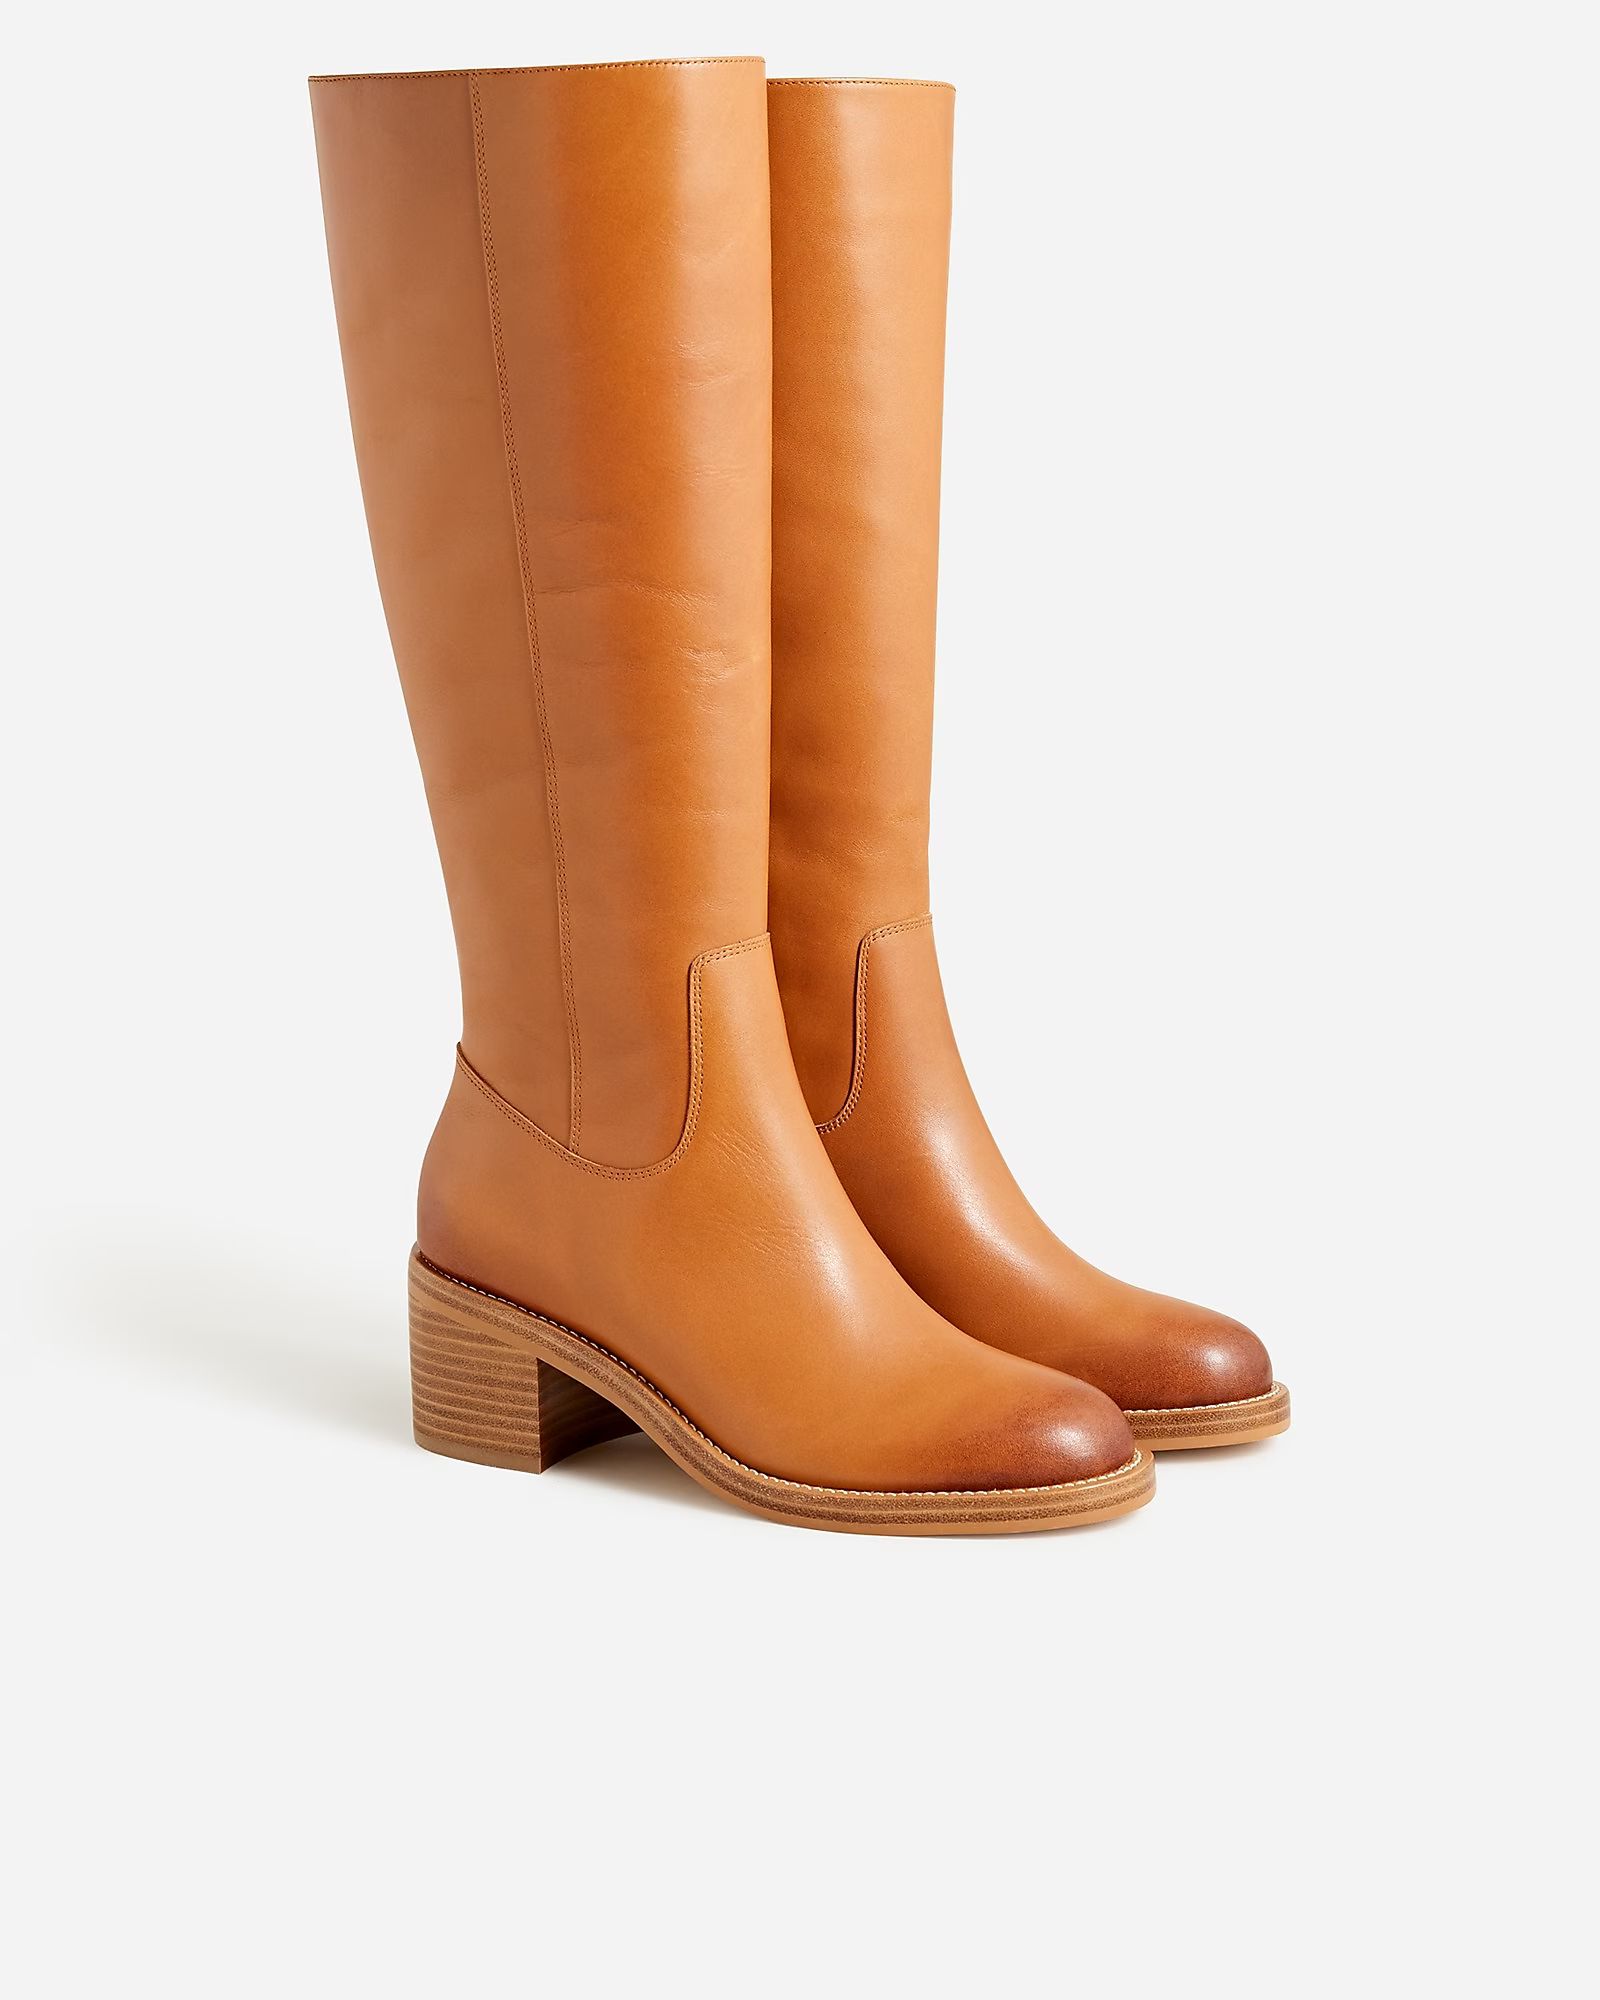 Knee-high stacked-heel boots in leather | J.Crew US